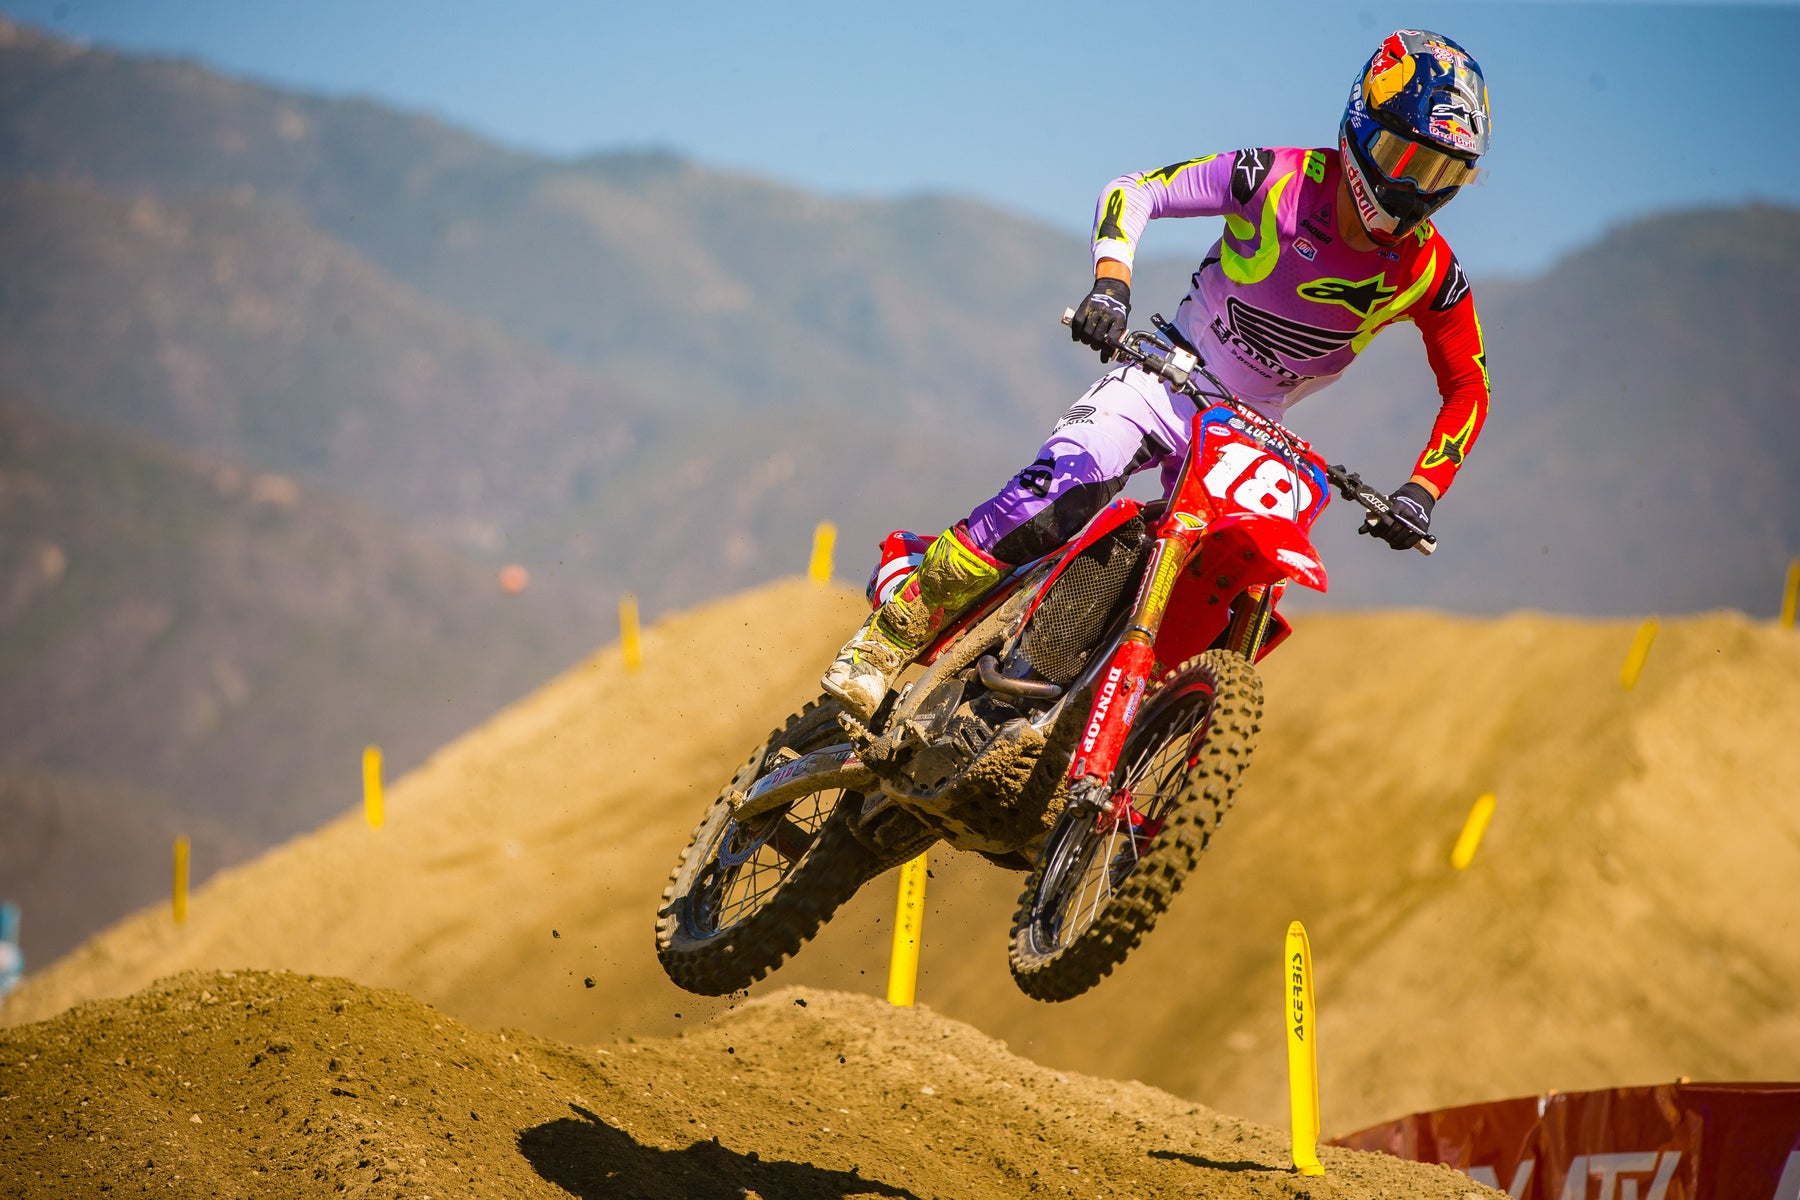 PODIUM LOCKOUT AS JETT LAWRENCE DELIVERS STUNNING DOUBLE WIN AT AMA 250 PRO MOTOCROSS RACES IN PALA